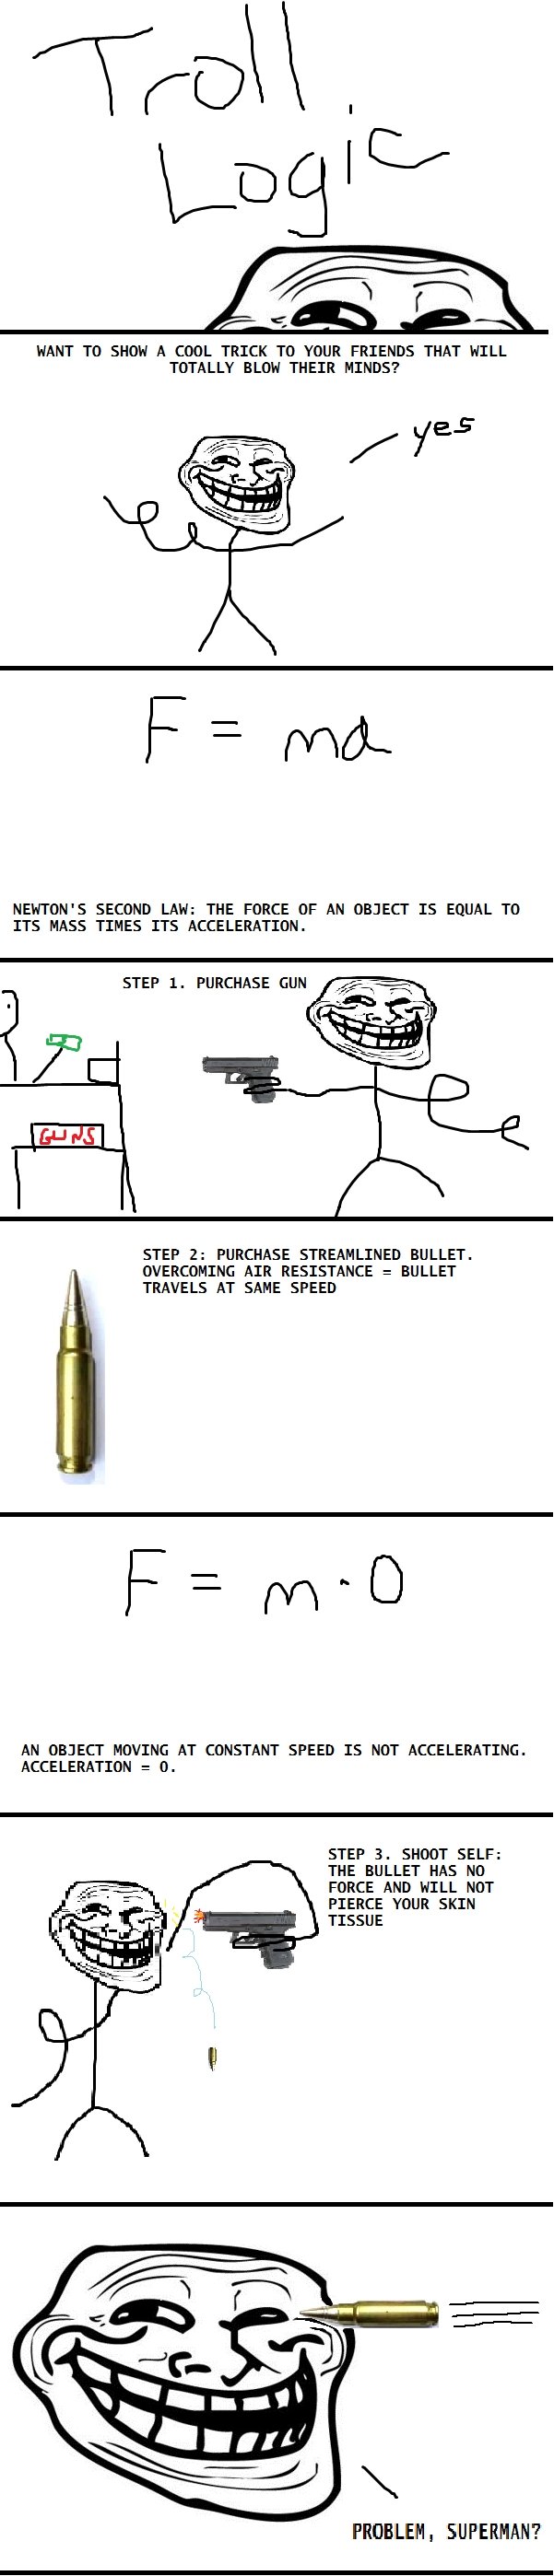 Troll Logic comic. first upload OC. HANT TO SHDL A COOL TRICK TO YOUR FRIENDS THAT HILL TOTALLY BDDH THEIR MINDS? NEWTON‘ S SECOND LAH: THE FORCE AN DEJECT IS E